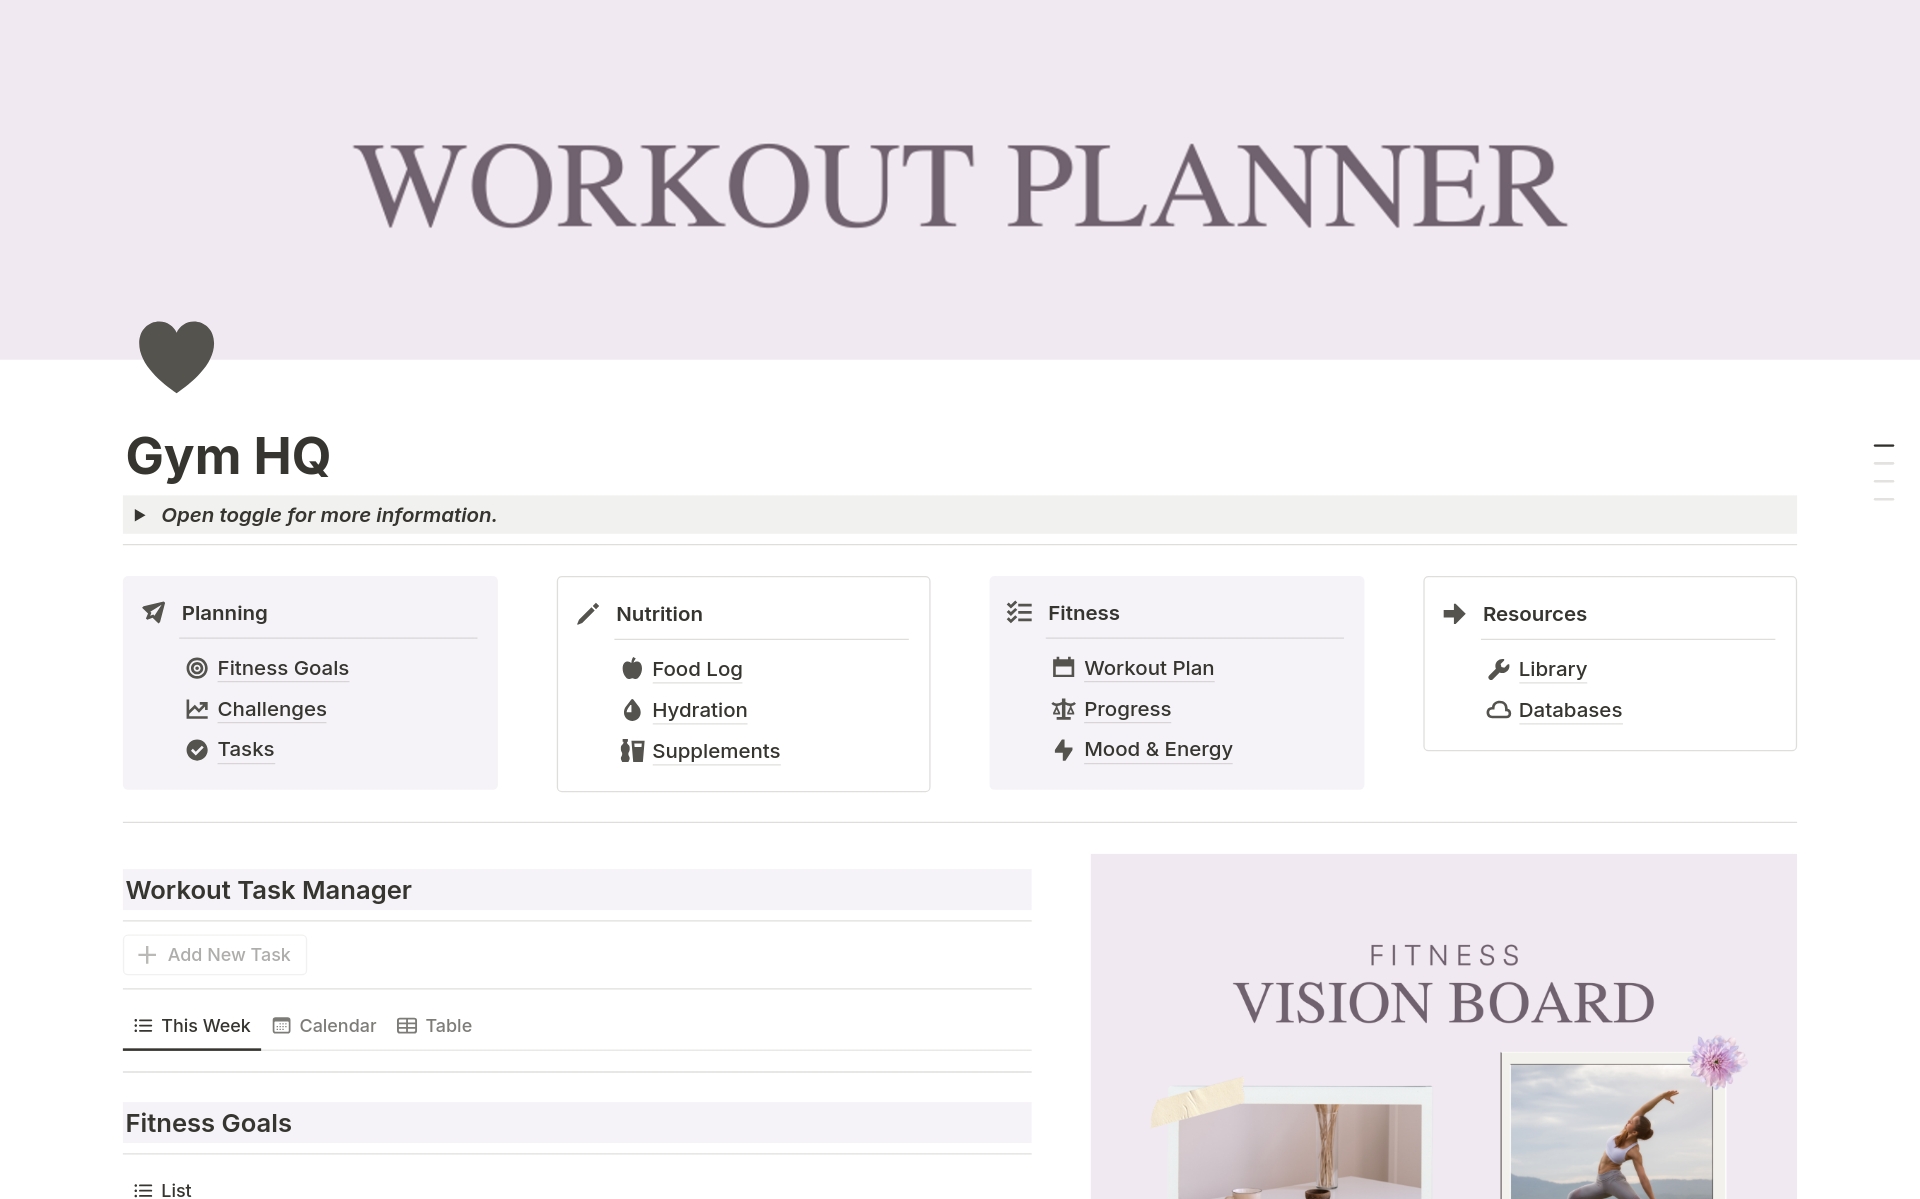 All-in-one template to track fitness goals, nutrition, workout plans, mood & energy and more. Perfect for anyone looking to organize their exercise regimen or for coaches seeking to provide added value to their services. Get inspired and set and track your fitness goals! 